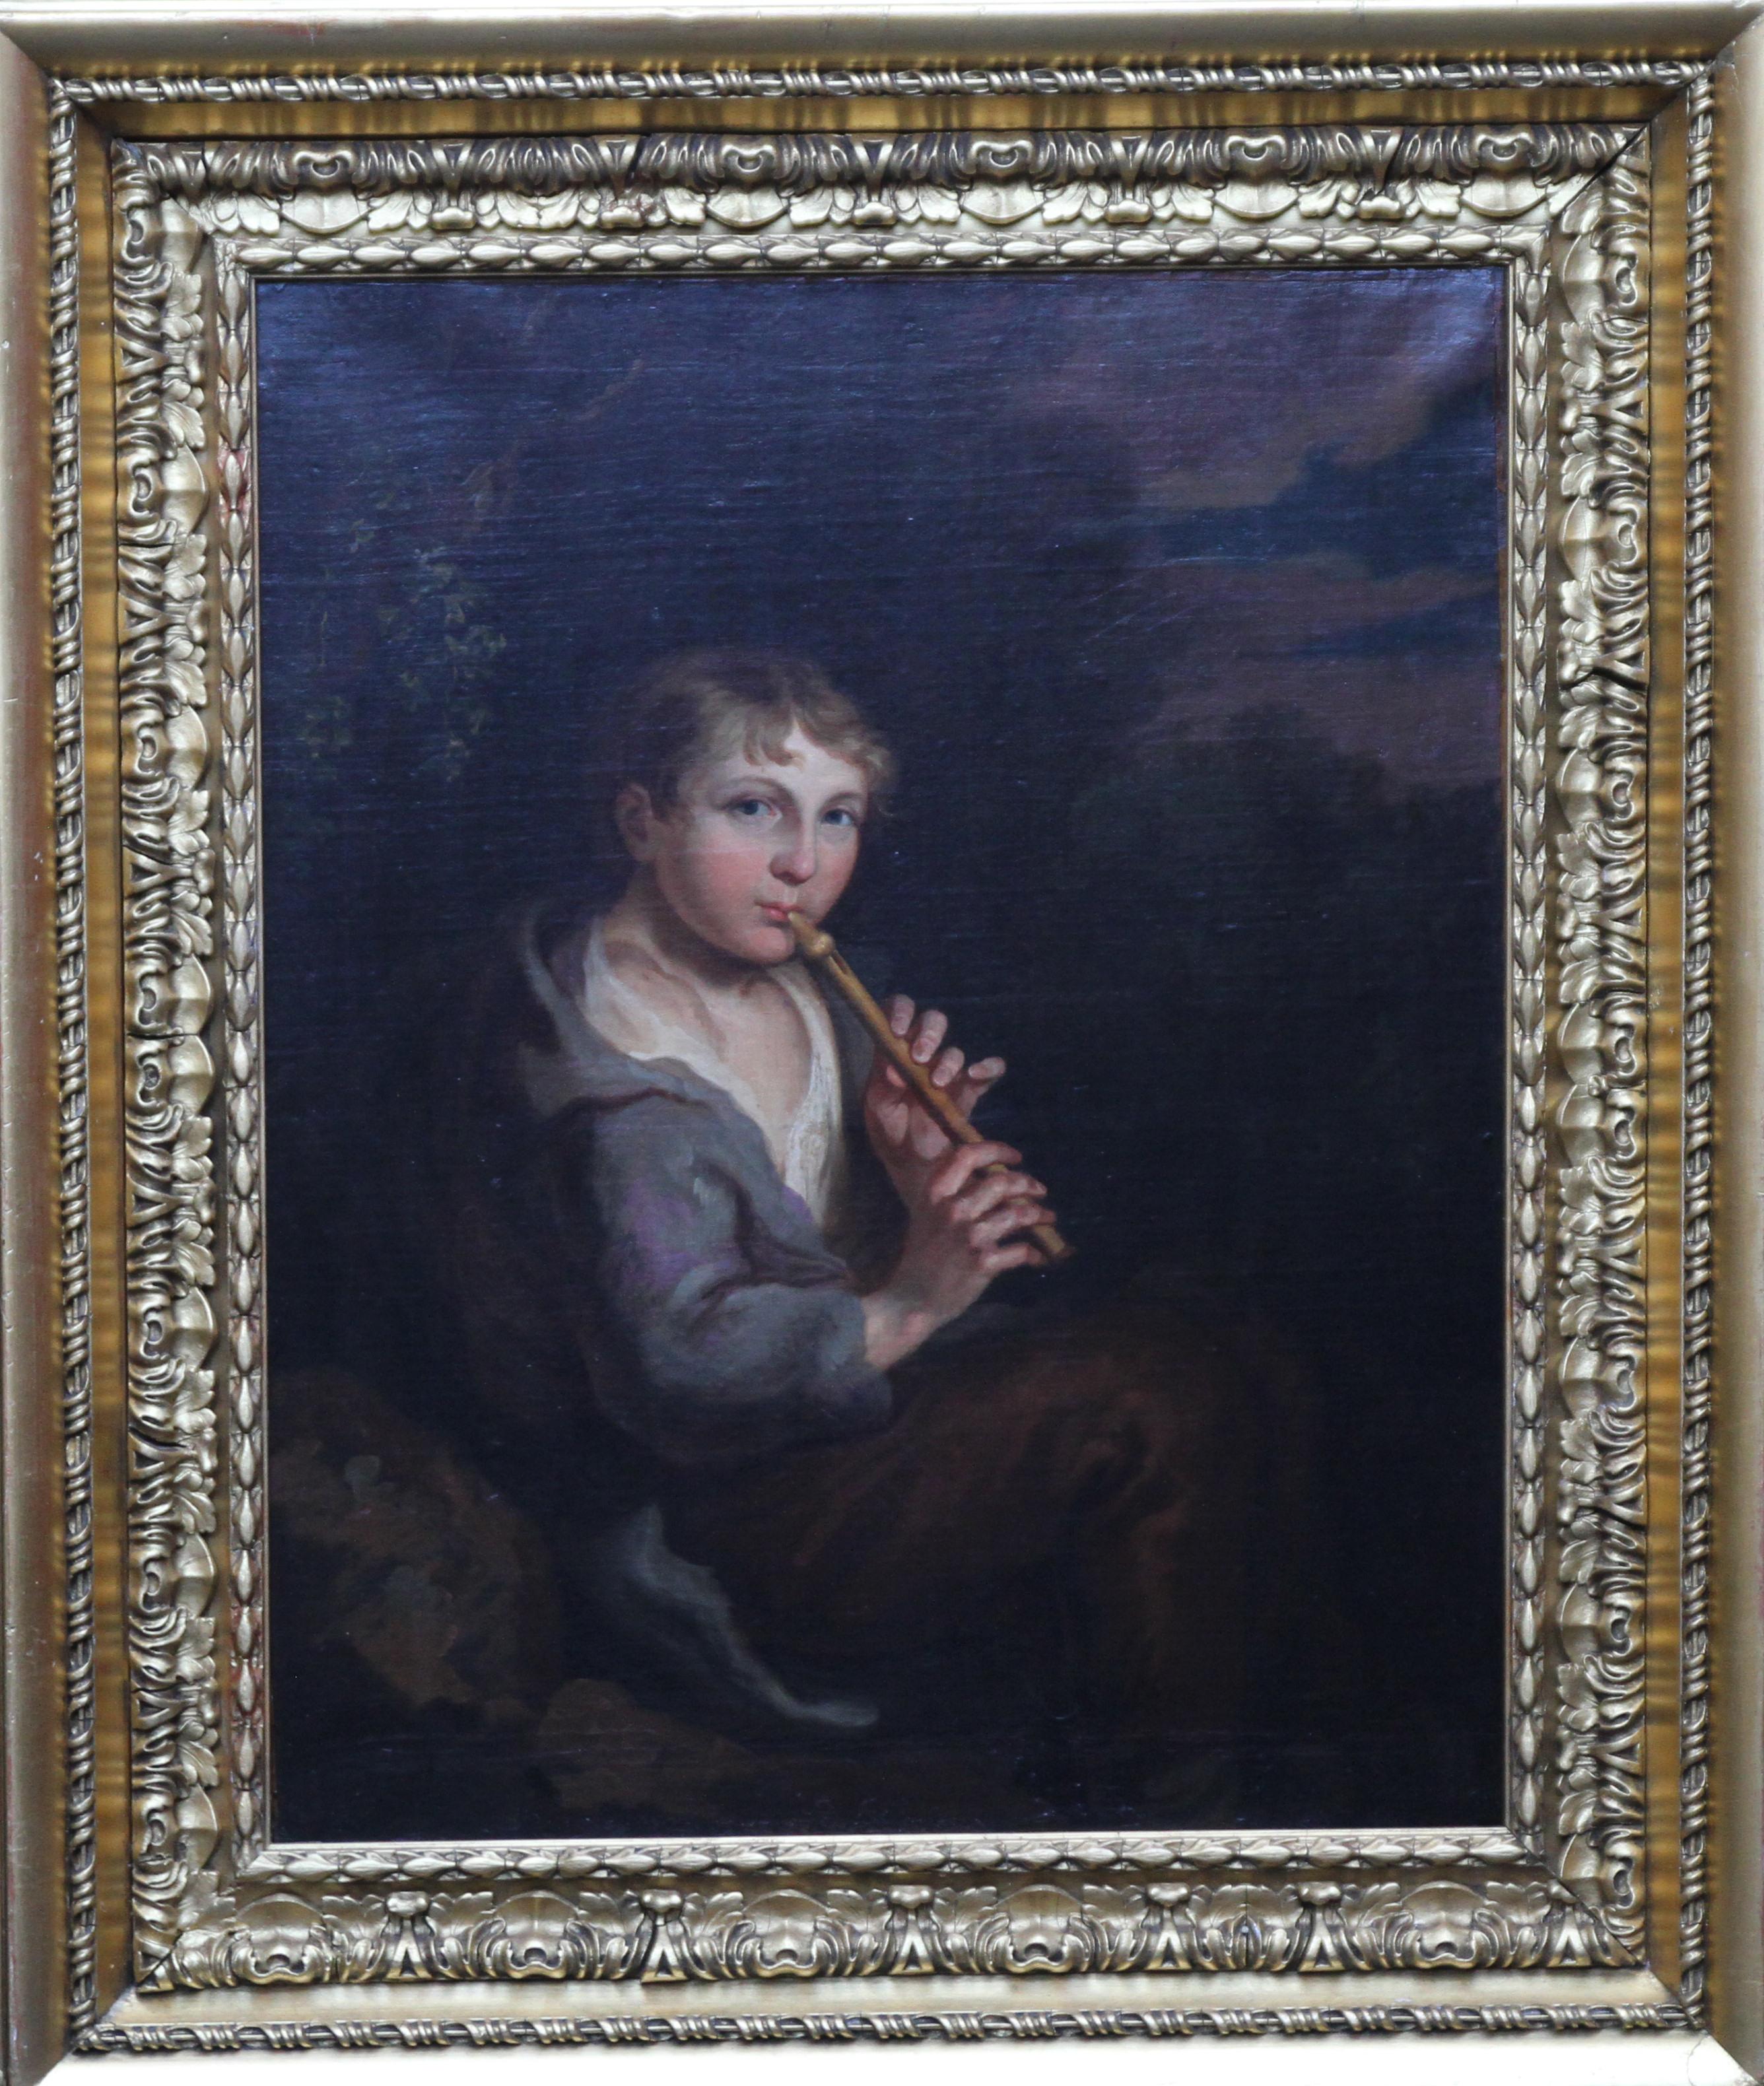 Portrait of Boy Playing a Flute - 18th/19th century art Old Master oil painting  For Sale 2